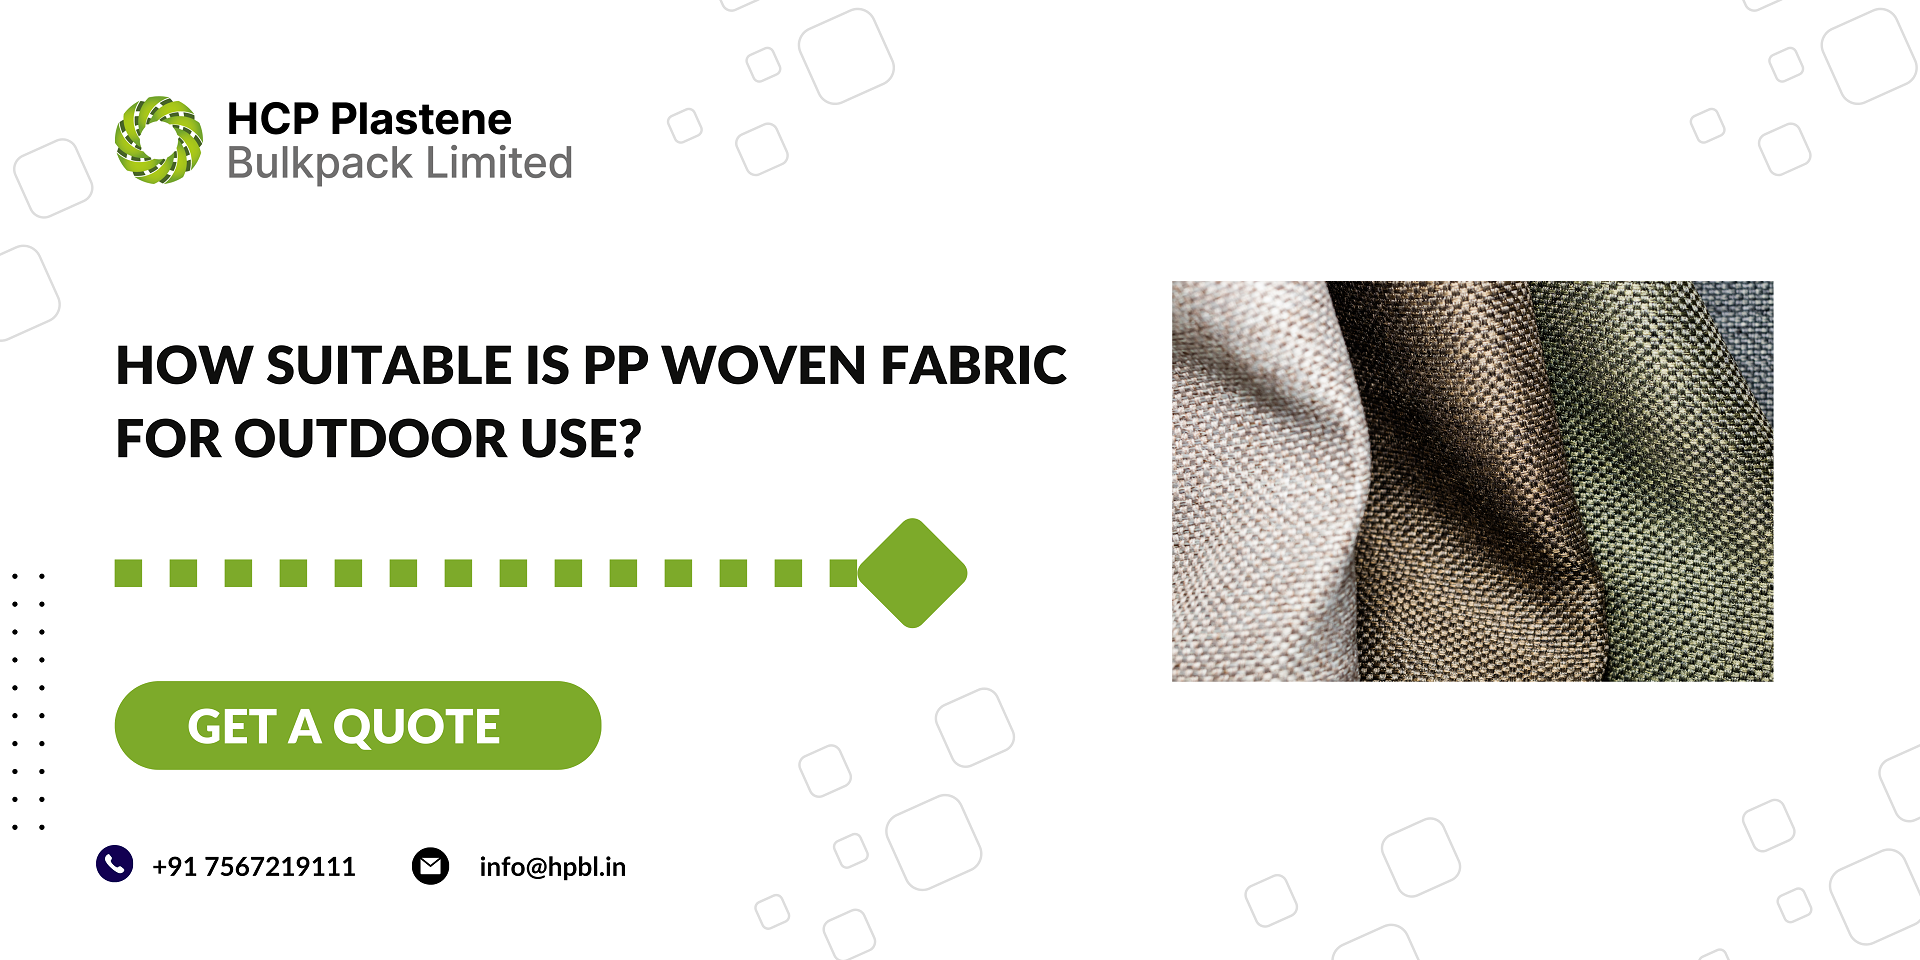 "How Suitable Is PP Woven Fabric For Outdoor Use? "